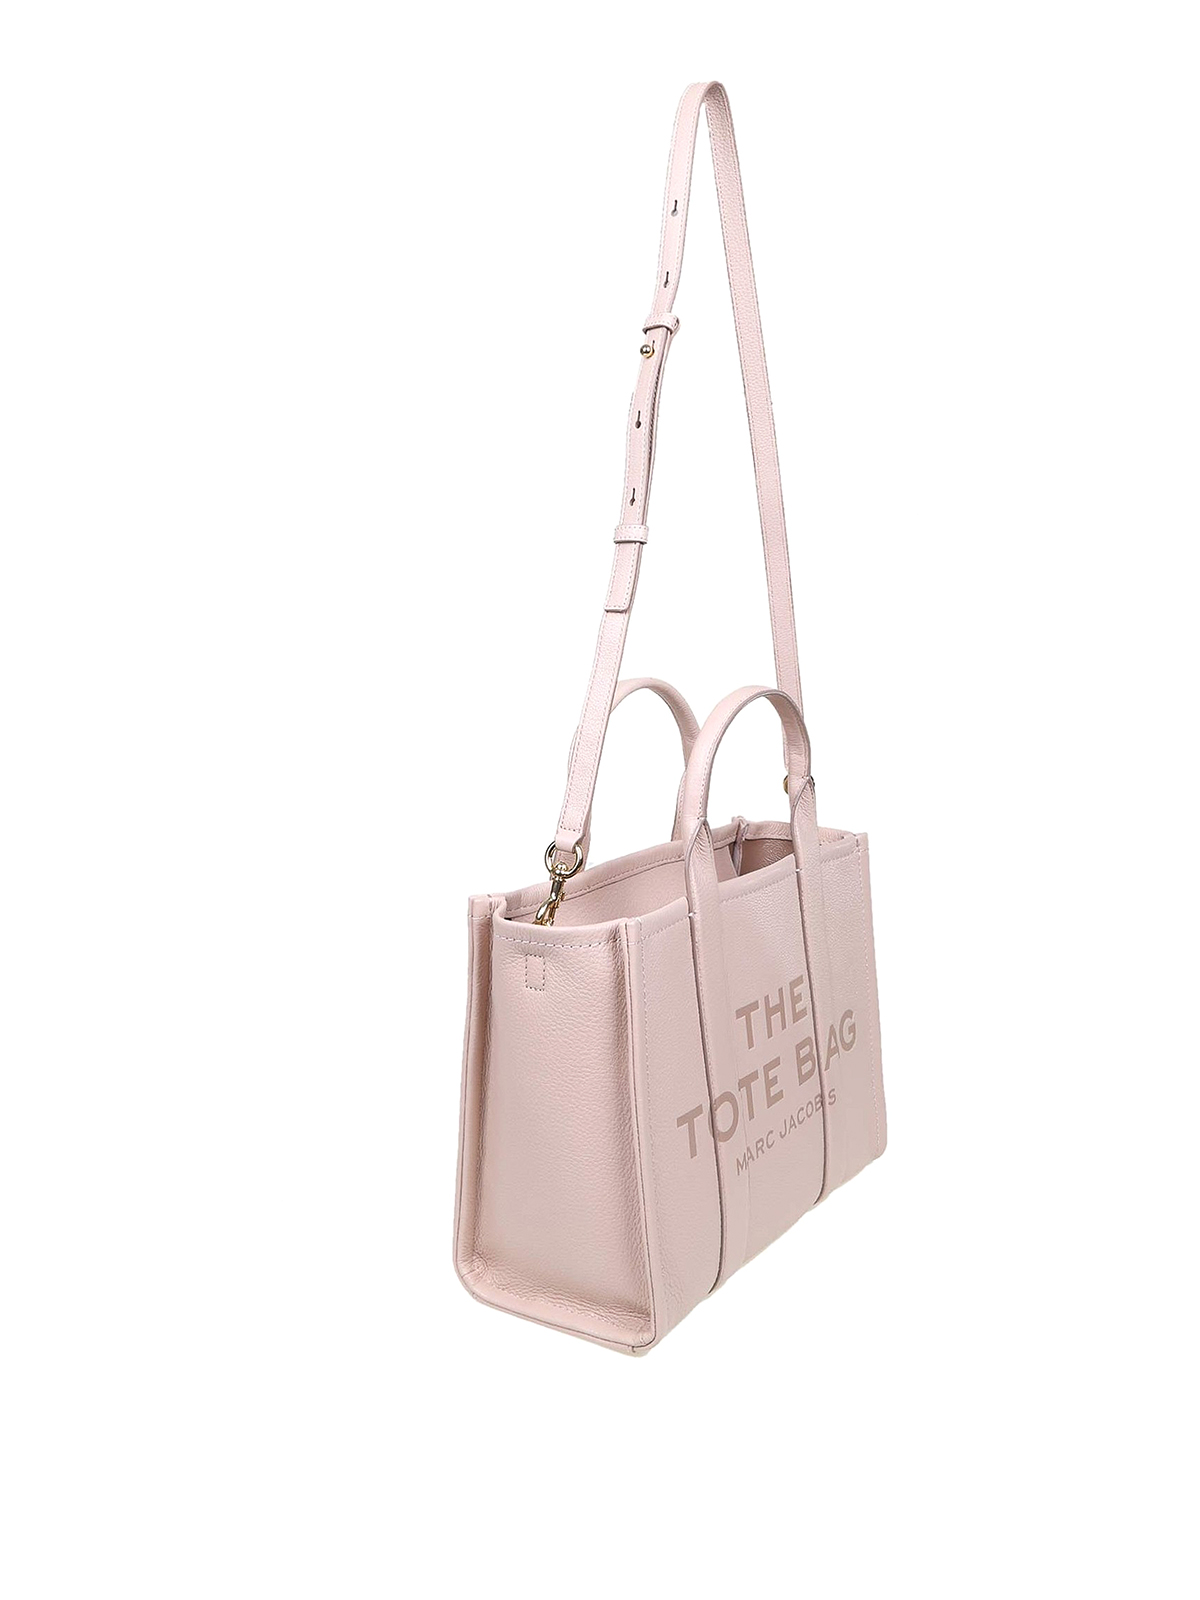 MARC JACOBS: tote bags for woman - Pink  Marc Jacobs tote bags H004L01PF21  online at